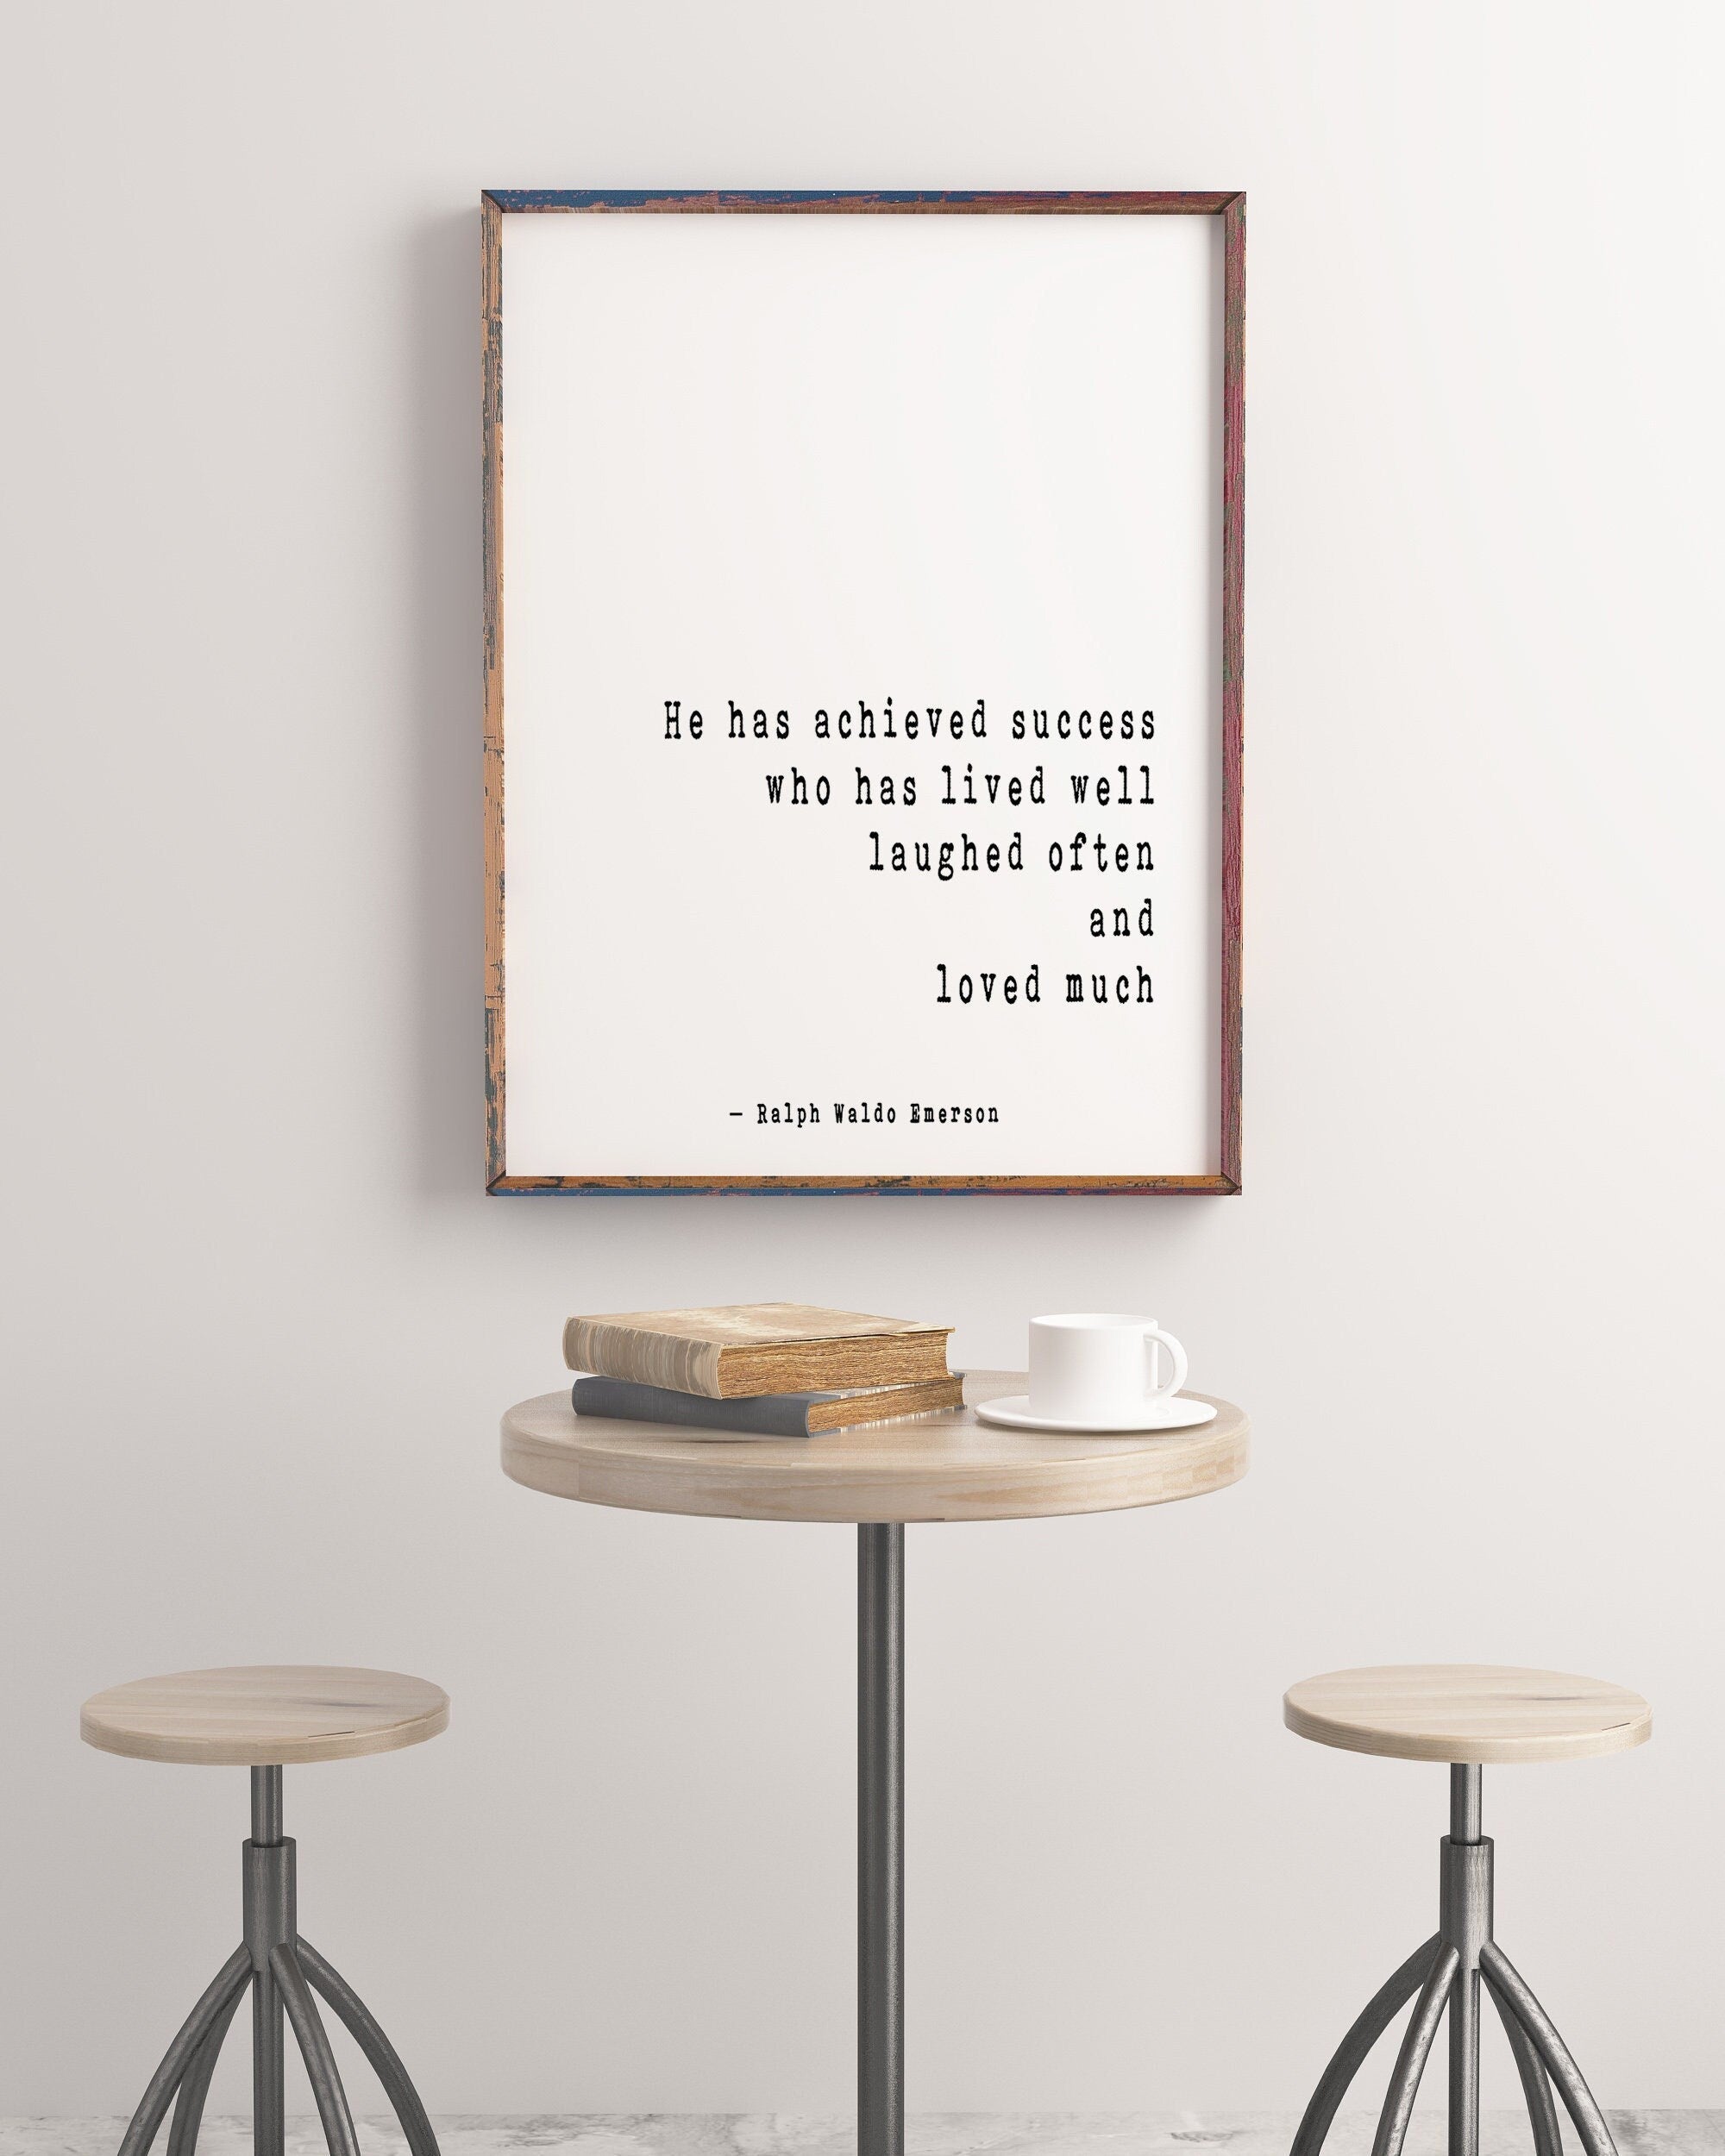 Ralph Waldo Emerson Inspirational Positive Success Quote, He Has Achieved Success Loved Laughed Art Print For Home Decor Unframed or Framed